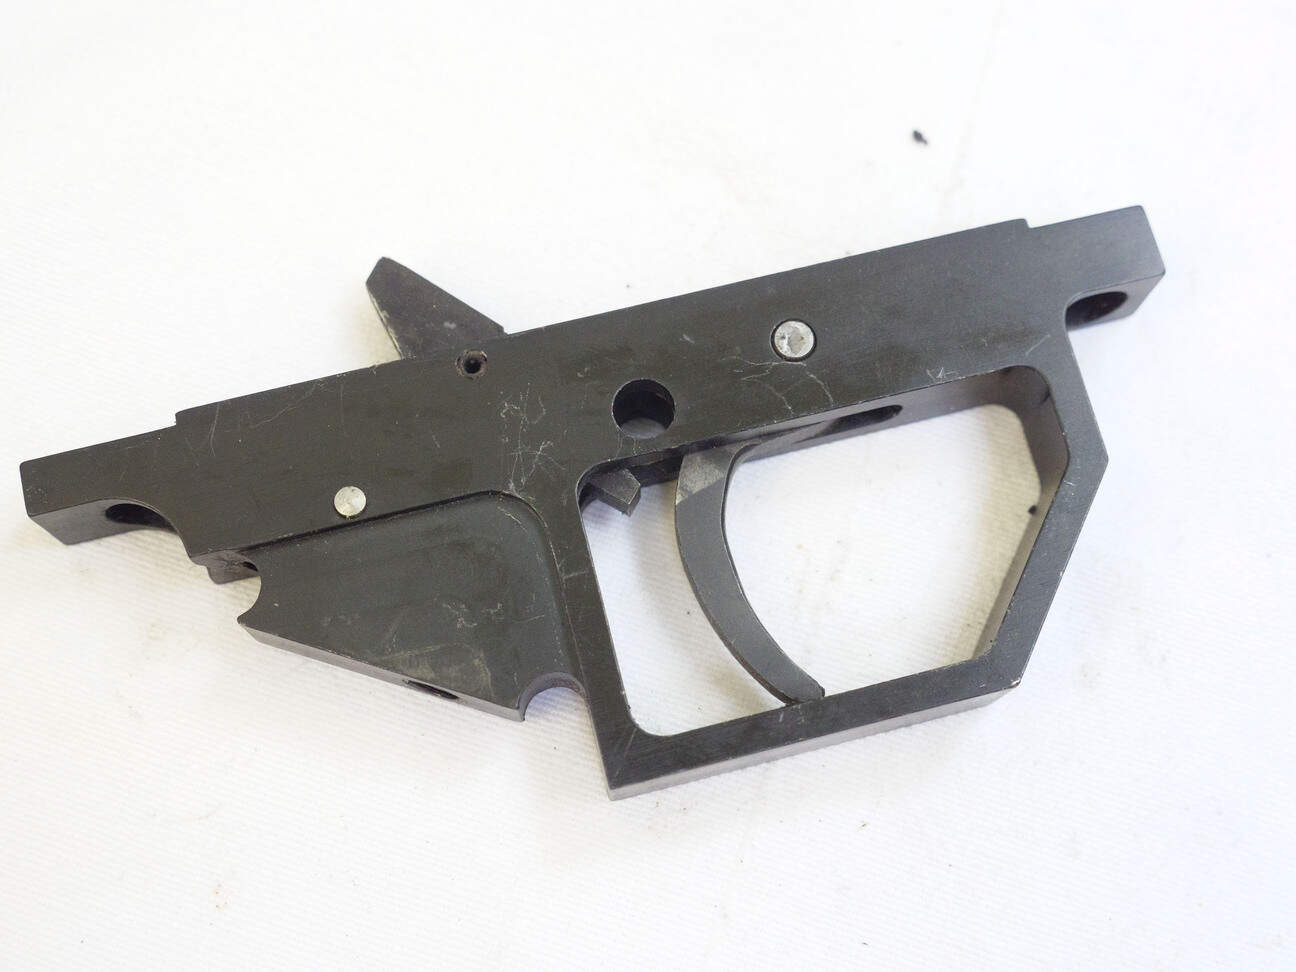 F1 trigger group in used shape